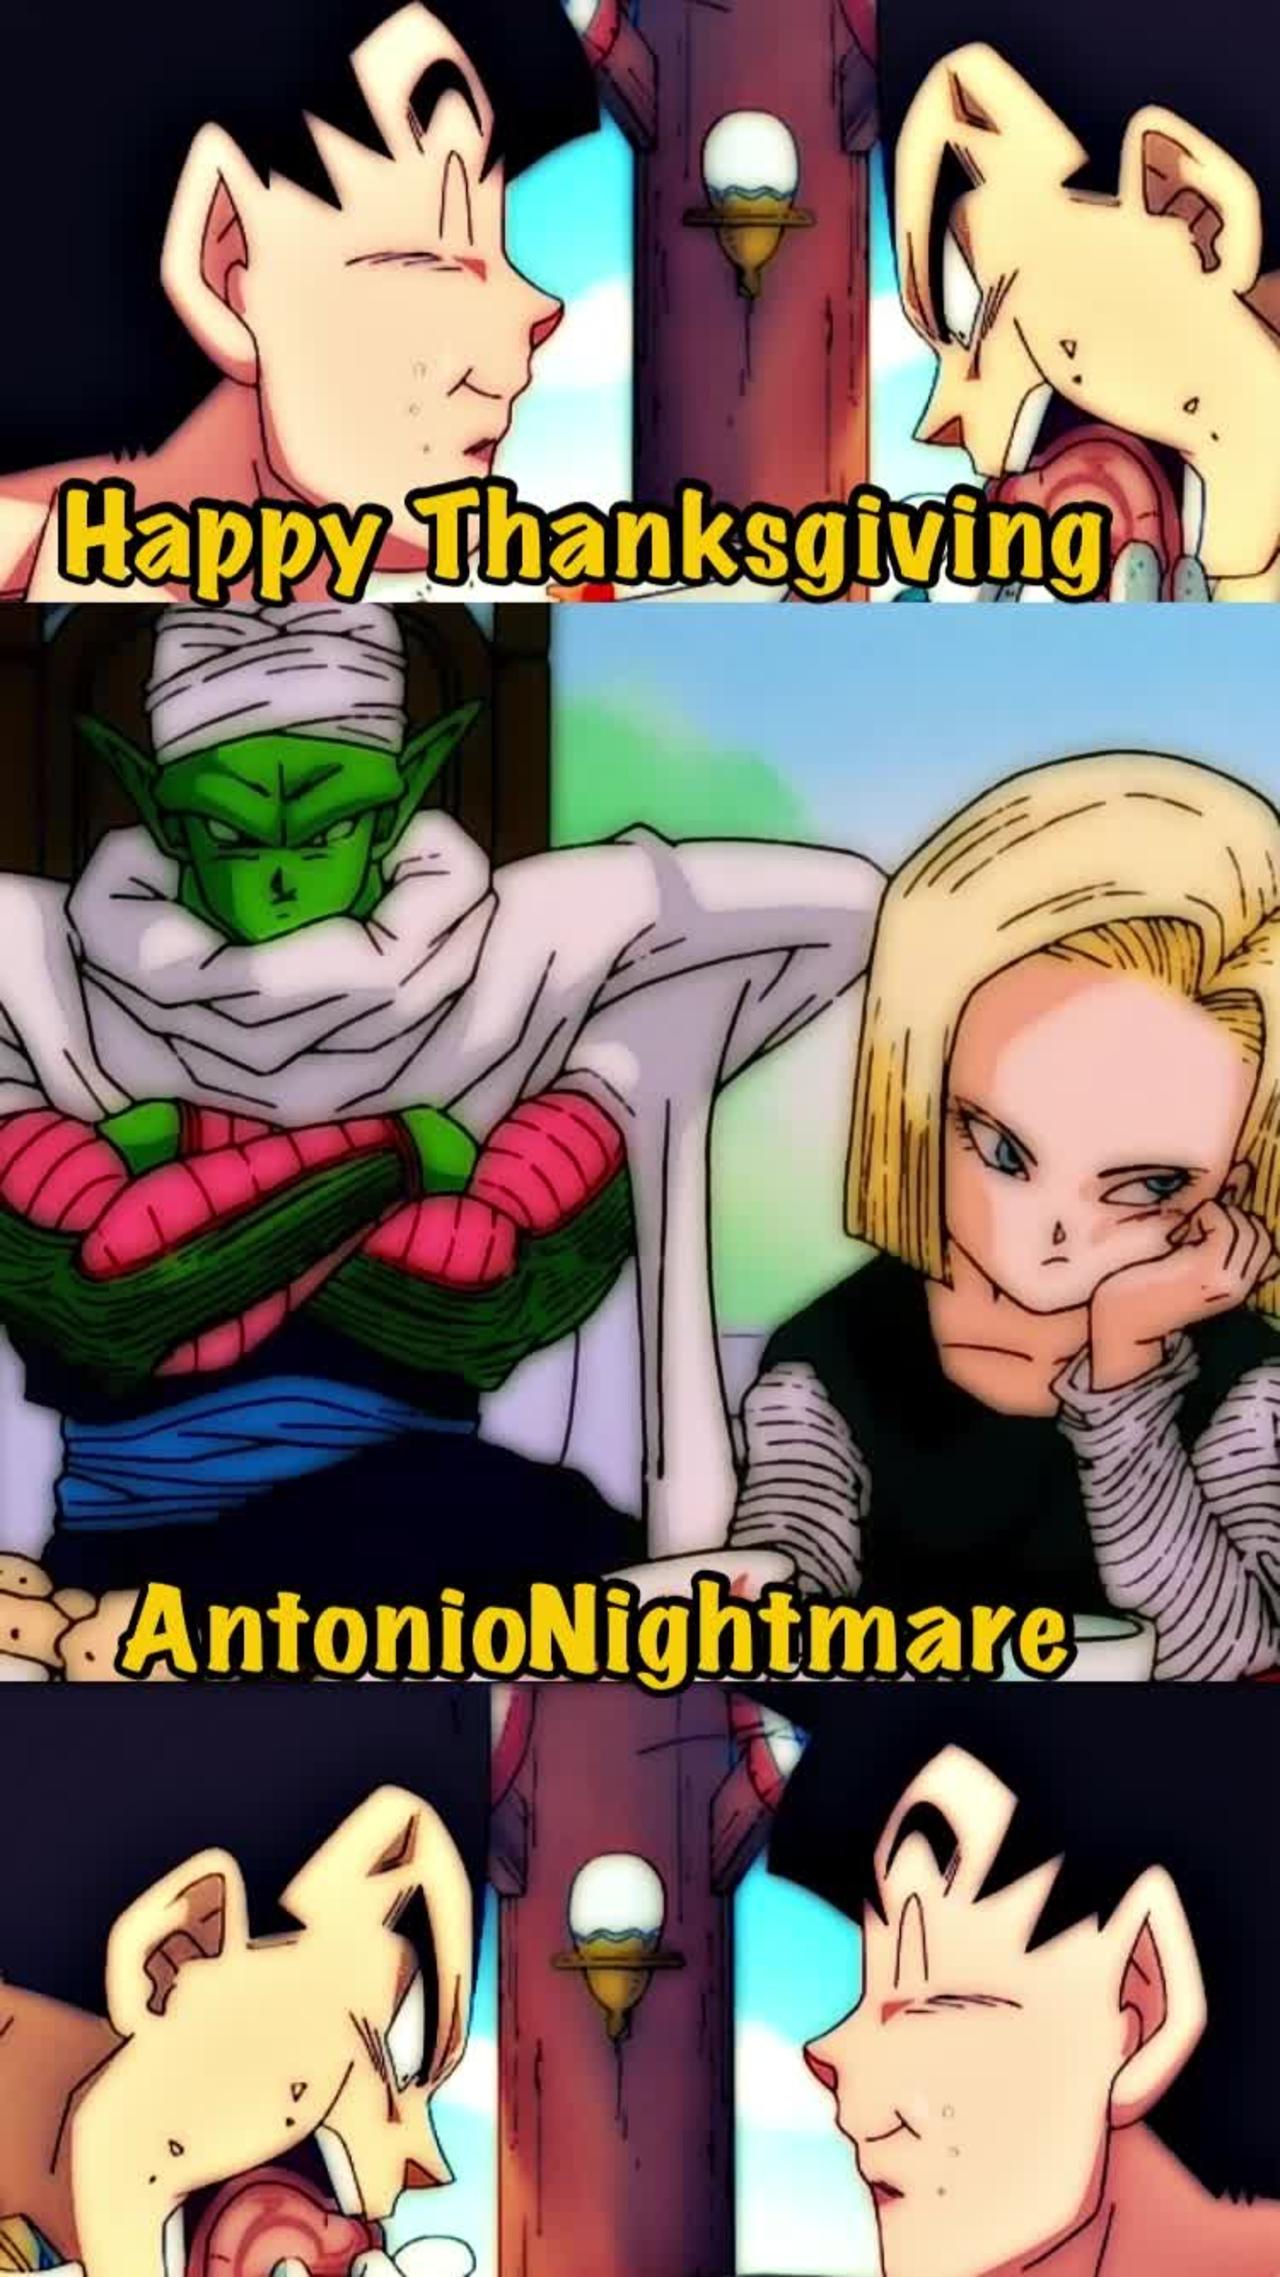 Happy Thanksgiving Dragon Ball Familia Version. Check out Piccolo and Android 18 hating on Saiyans.